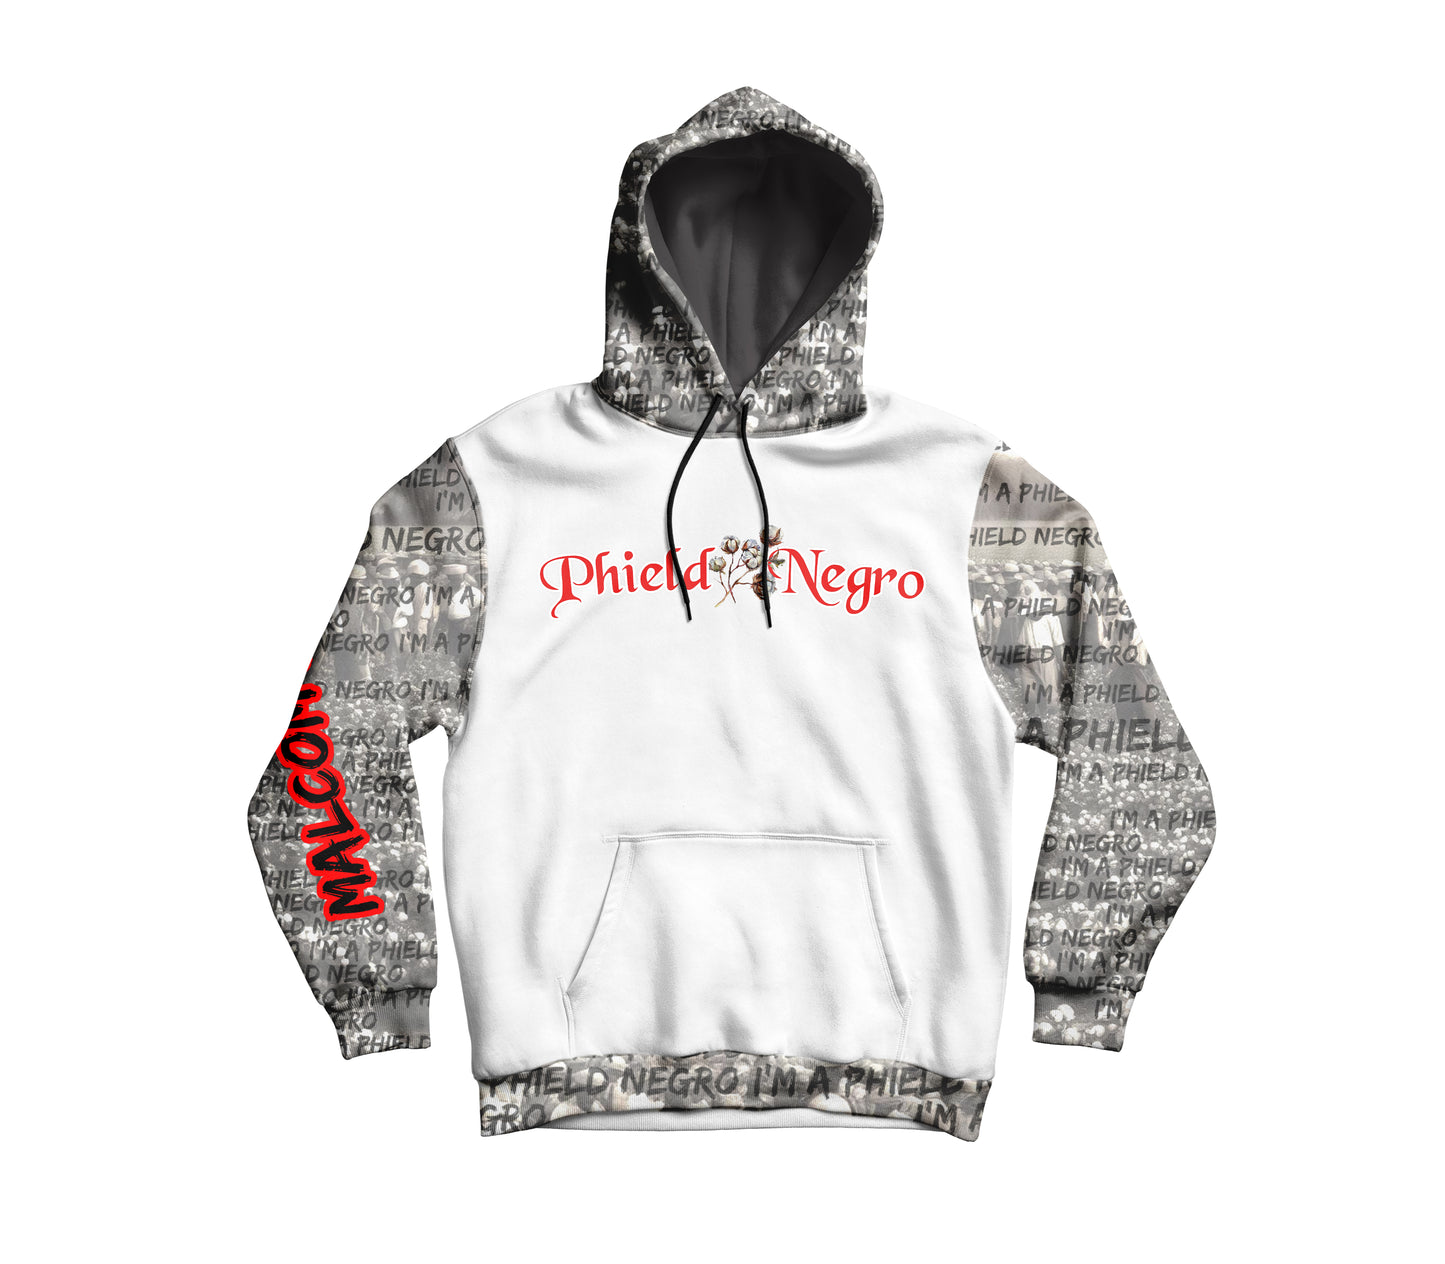 Malcom X - I'm a Phield Negro All-Over Print Men's Pullover Hoodie